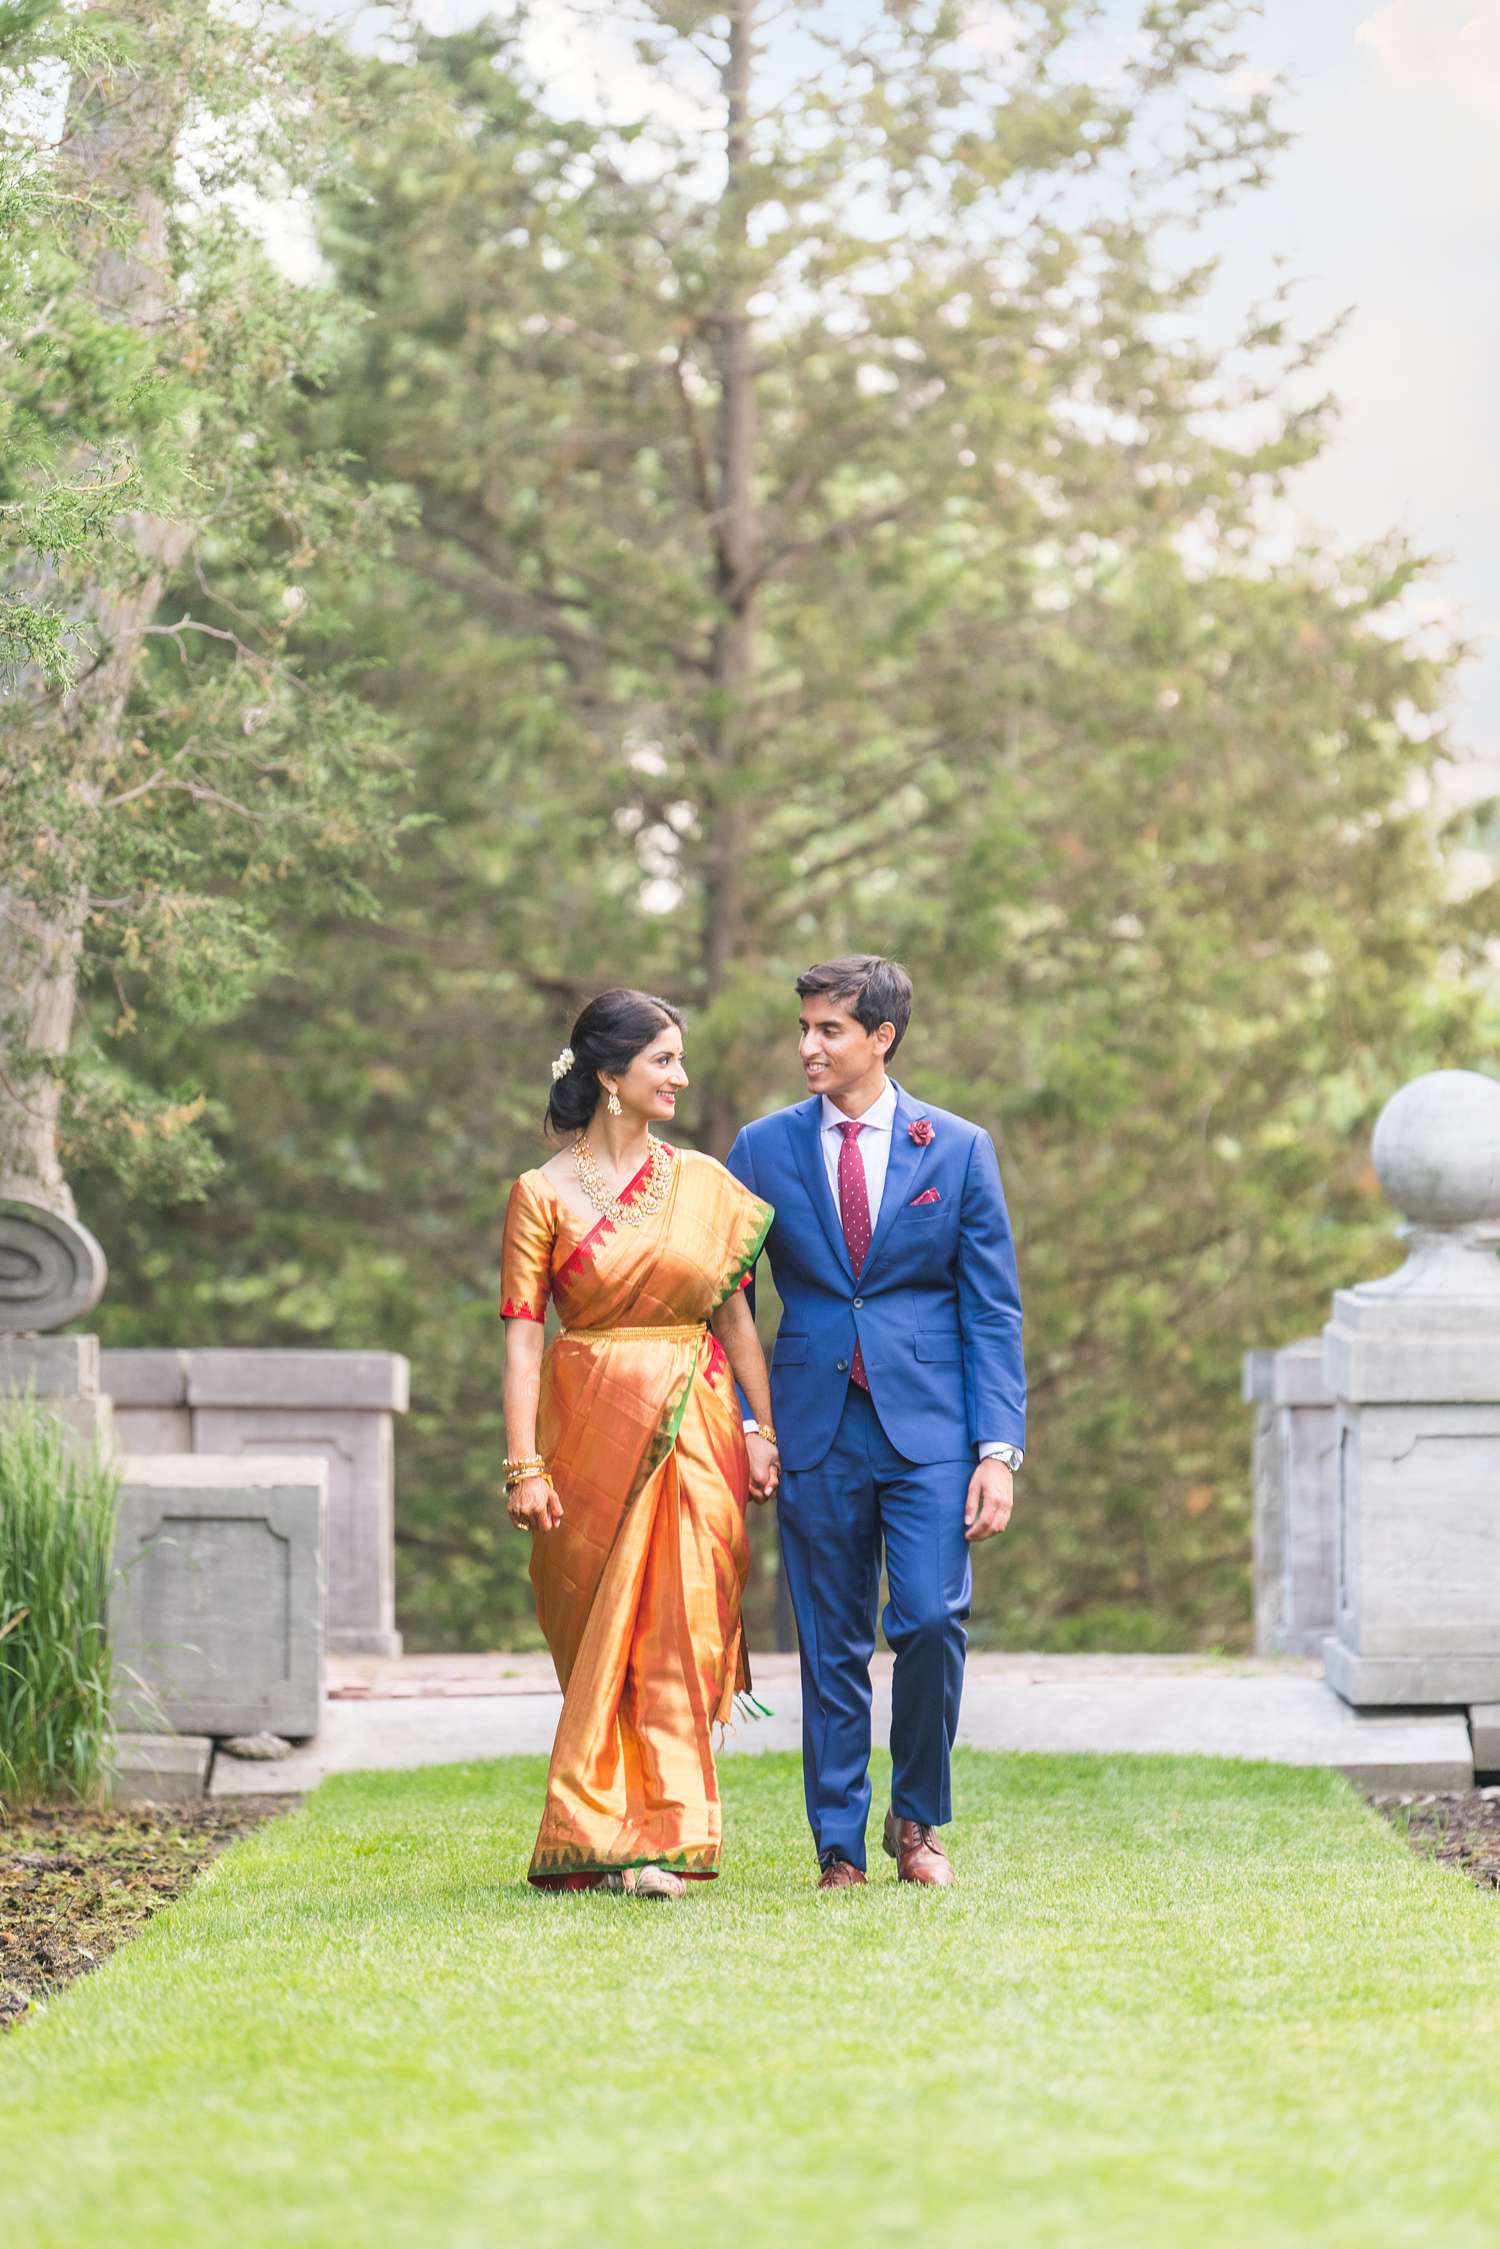 South Indian Bride orange wedding saree and groom wearing blue suit for wedding photos